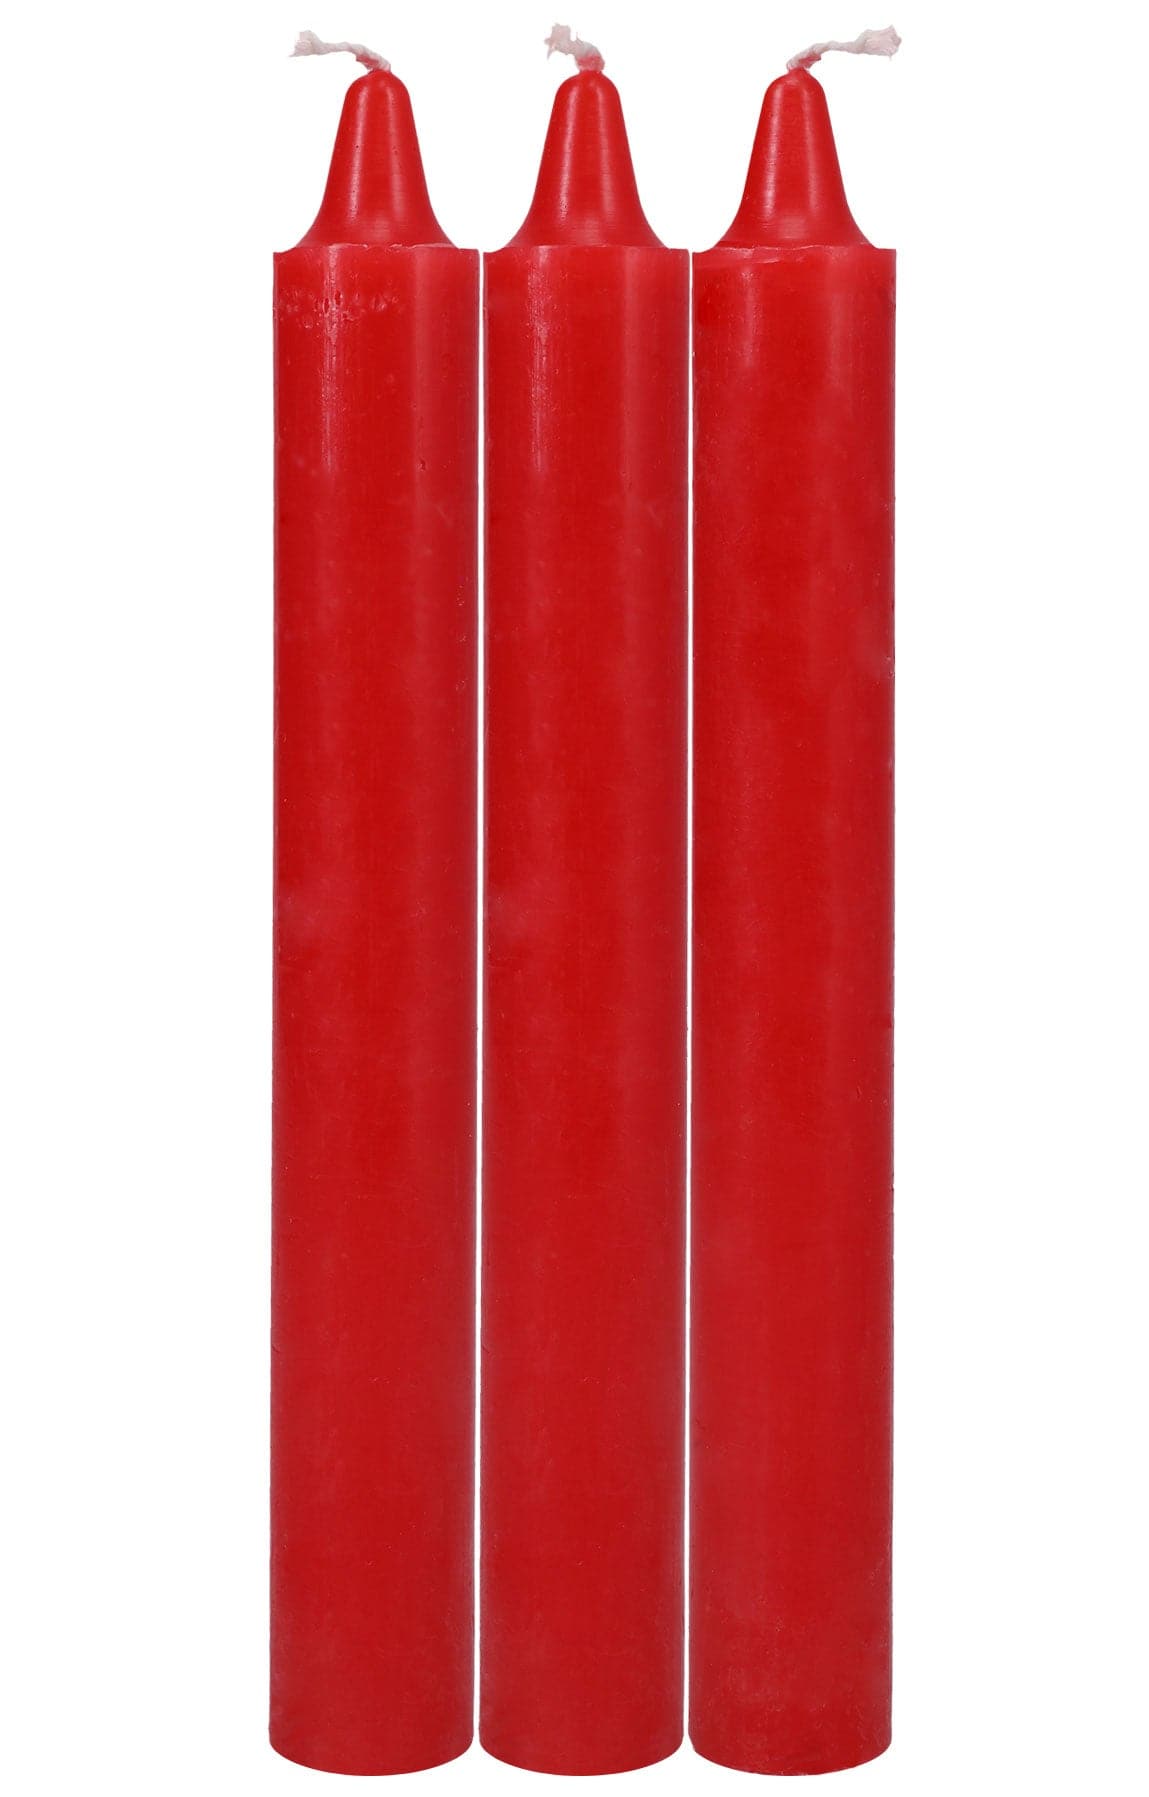 japanese drip candles 3 pack red